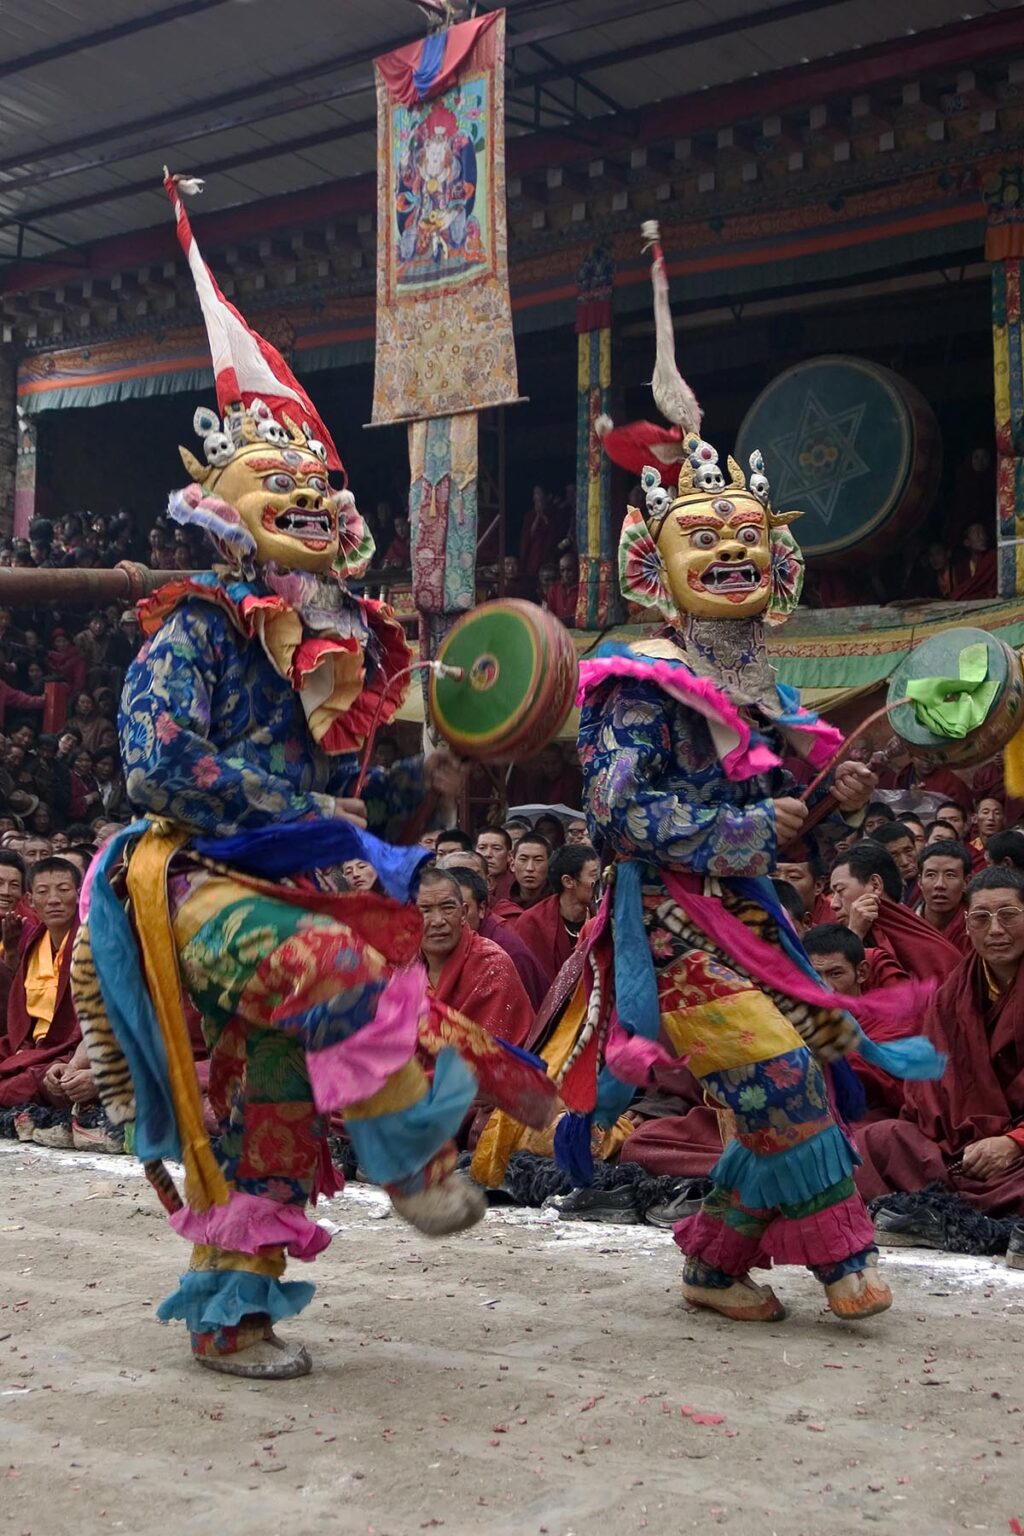 Masked dancers with skulls representing impermanence at the Cham dances, Katok Monastery - Kham, (Tibet), Sichuan, China